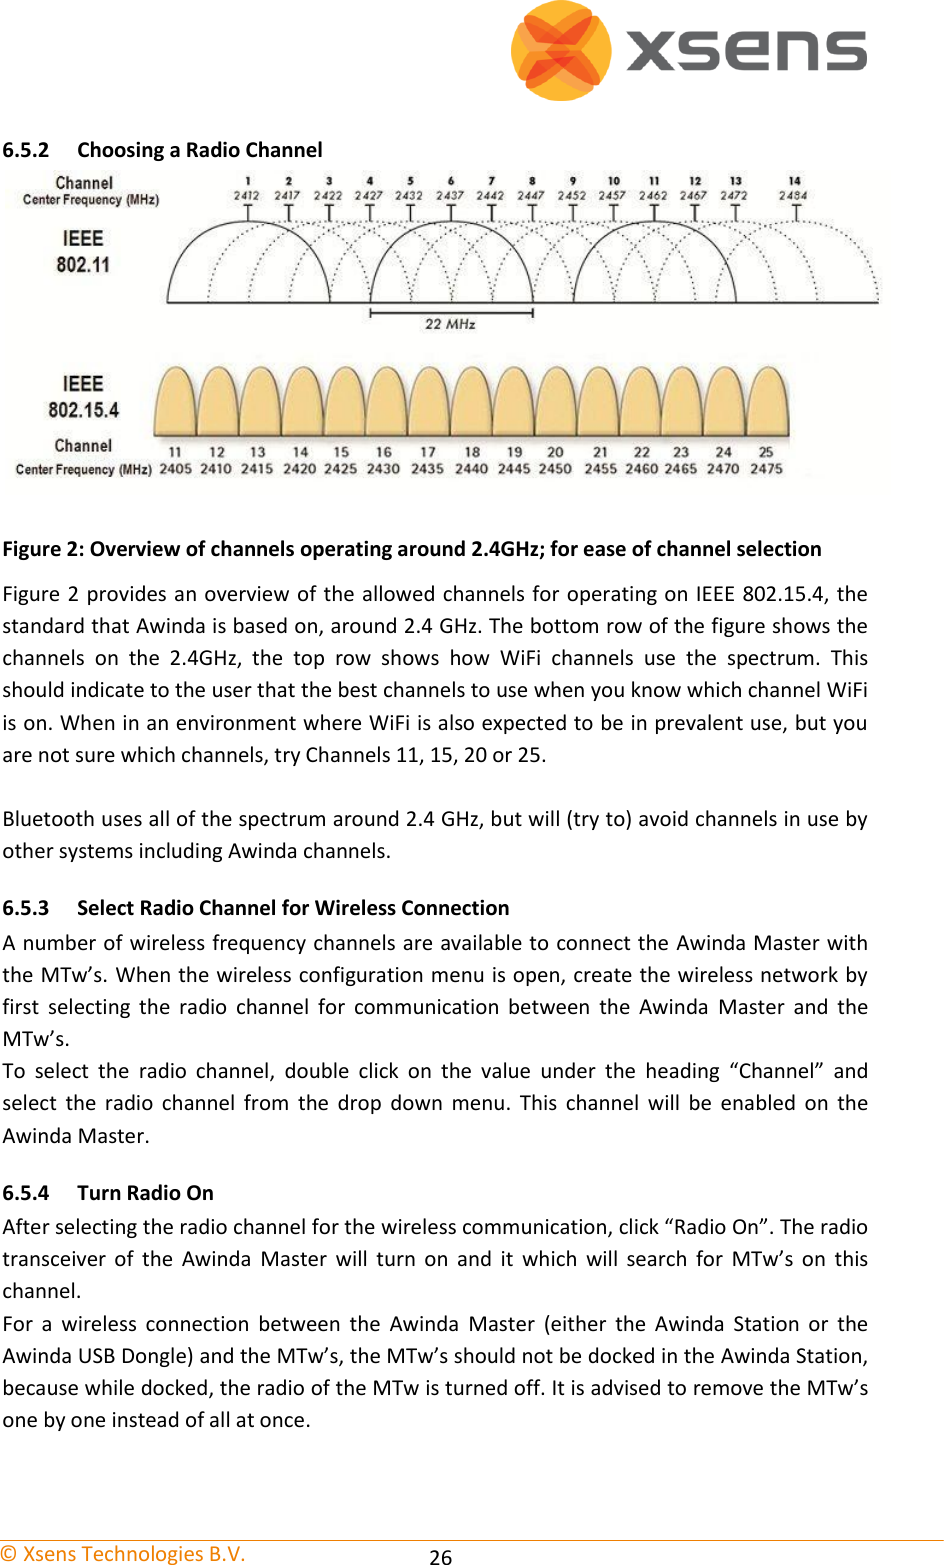   © Xsens Technologies B.V.   26 6.5.2 Choosing a Radio Channel  Figure 2: Overview of channels operating around 2.4GHz; for ease of channel selection Figure 2 provides an overview of the allowed channels for operating on IEEE 802.15.4, the standard that Awinda is based on, around 2.4 GHz. The bottom row of the figure shows the channels  on  the  2.4GHz,  the  top  row  shows  how  WiFi  channels  use  the  spectrum.  This should indicate to the user that the best channels to use when you know which channel WiFi is on. When in an environment where WiFi is also expected to be in prevalent use, but you are not sure which channels, try Channels 11, 15, 20 or 25.  Bluetooth uses all of the spectrum around 2.4 GHz, but will (try to) avoid channels in use by other systems including Awinda channels. 6.5.3 Select Radio Channel for Wireless Connection A number of wireless frequency channels are available to connect the Awinda Master with the MTw’s. When the wireless configuration menu is open, create the wireless network by first  selecting  the  radio  channel  for  communication  between  the  Awinda  Master  and  the MTw’s. To  select  the  radio  channel,  double  click  on  the  value  under  the  heading  “Channel”  and select  the  radio  channel  from  the  drop  down  menu.  This  channel  will  be  enabled  on  the Awinda Master. 6.5.4 Turn Radio On After selecting the radio channel for the wireless communication, click “Radio On”. The radio transceiver  of  the  Awinda  Master  will  turn  on  and  it  which  will  search  for  MTw’s  on  this channel. For  a  wireless  connection  between  the  Awinda  Master  (either  the  Awinda  Station  or  the Awinda USB Dongle) and the MTw’s, the MTw’s should not be docked in the Awinda Station, because while docked, the radio of the MTw is turned off. It is advised to remove the MTw’s one by one instead of all at once.  